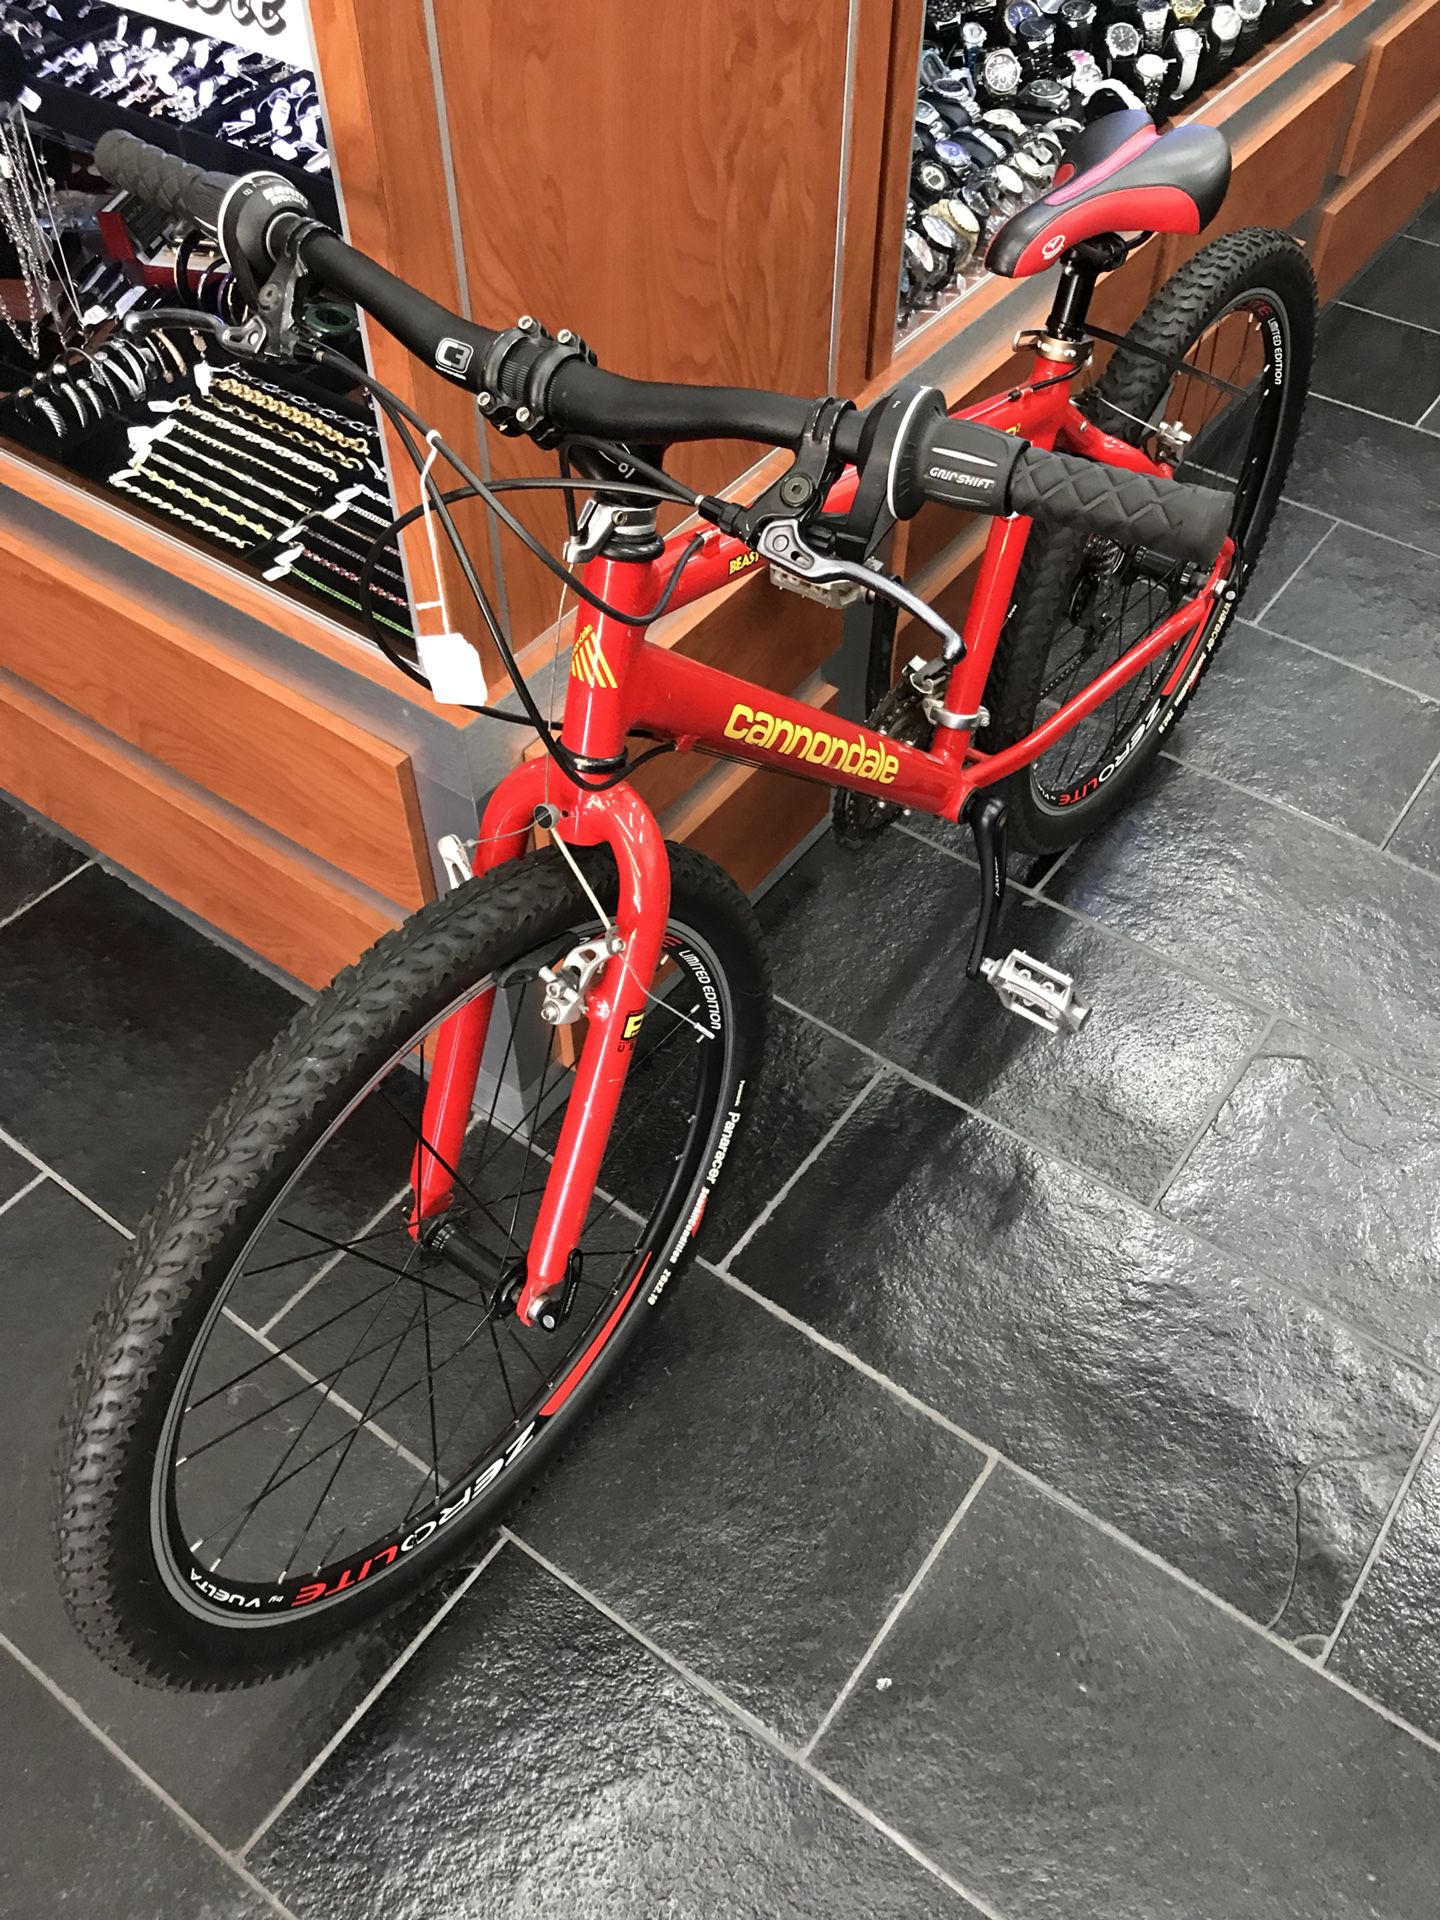 Cannondale Beast Of The East Cad2 Mountain Bike Bicycle For Sale In Boca Raton Fl Offerup